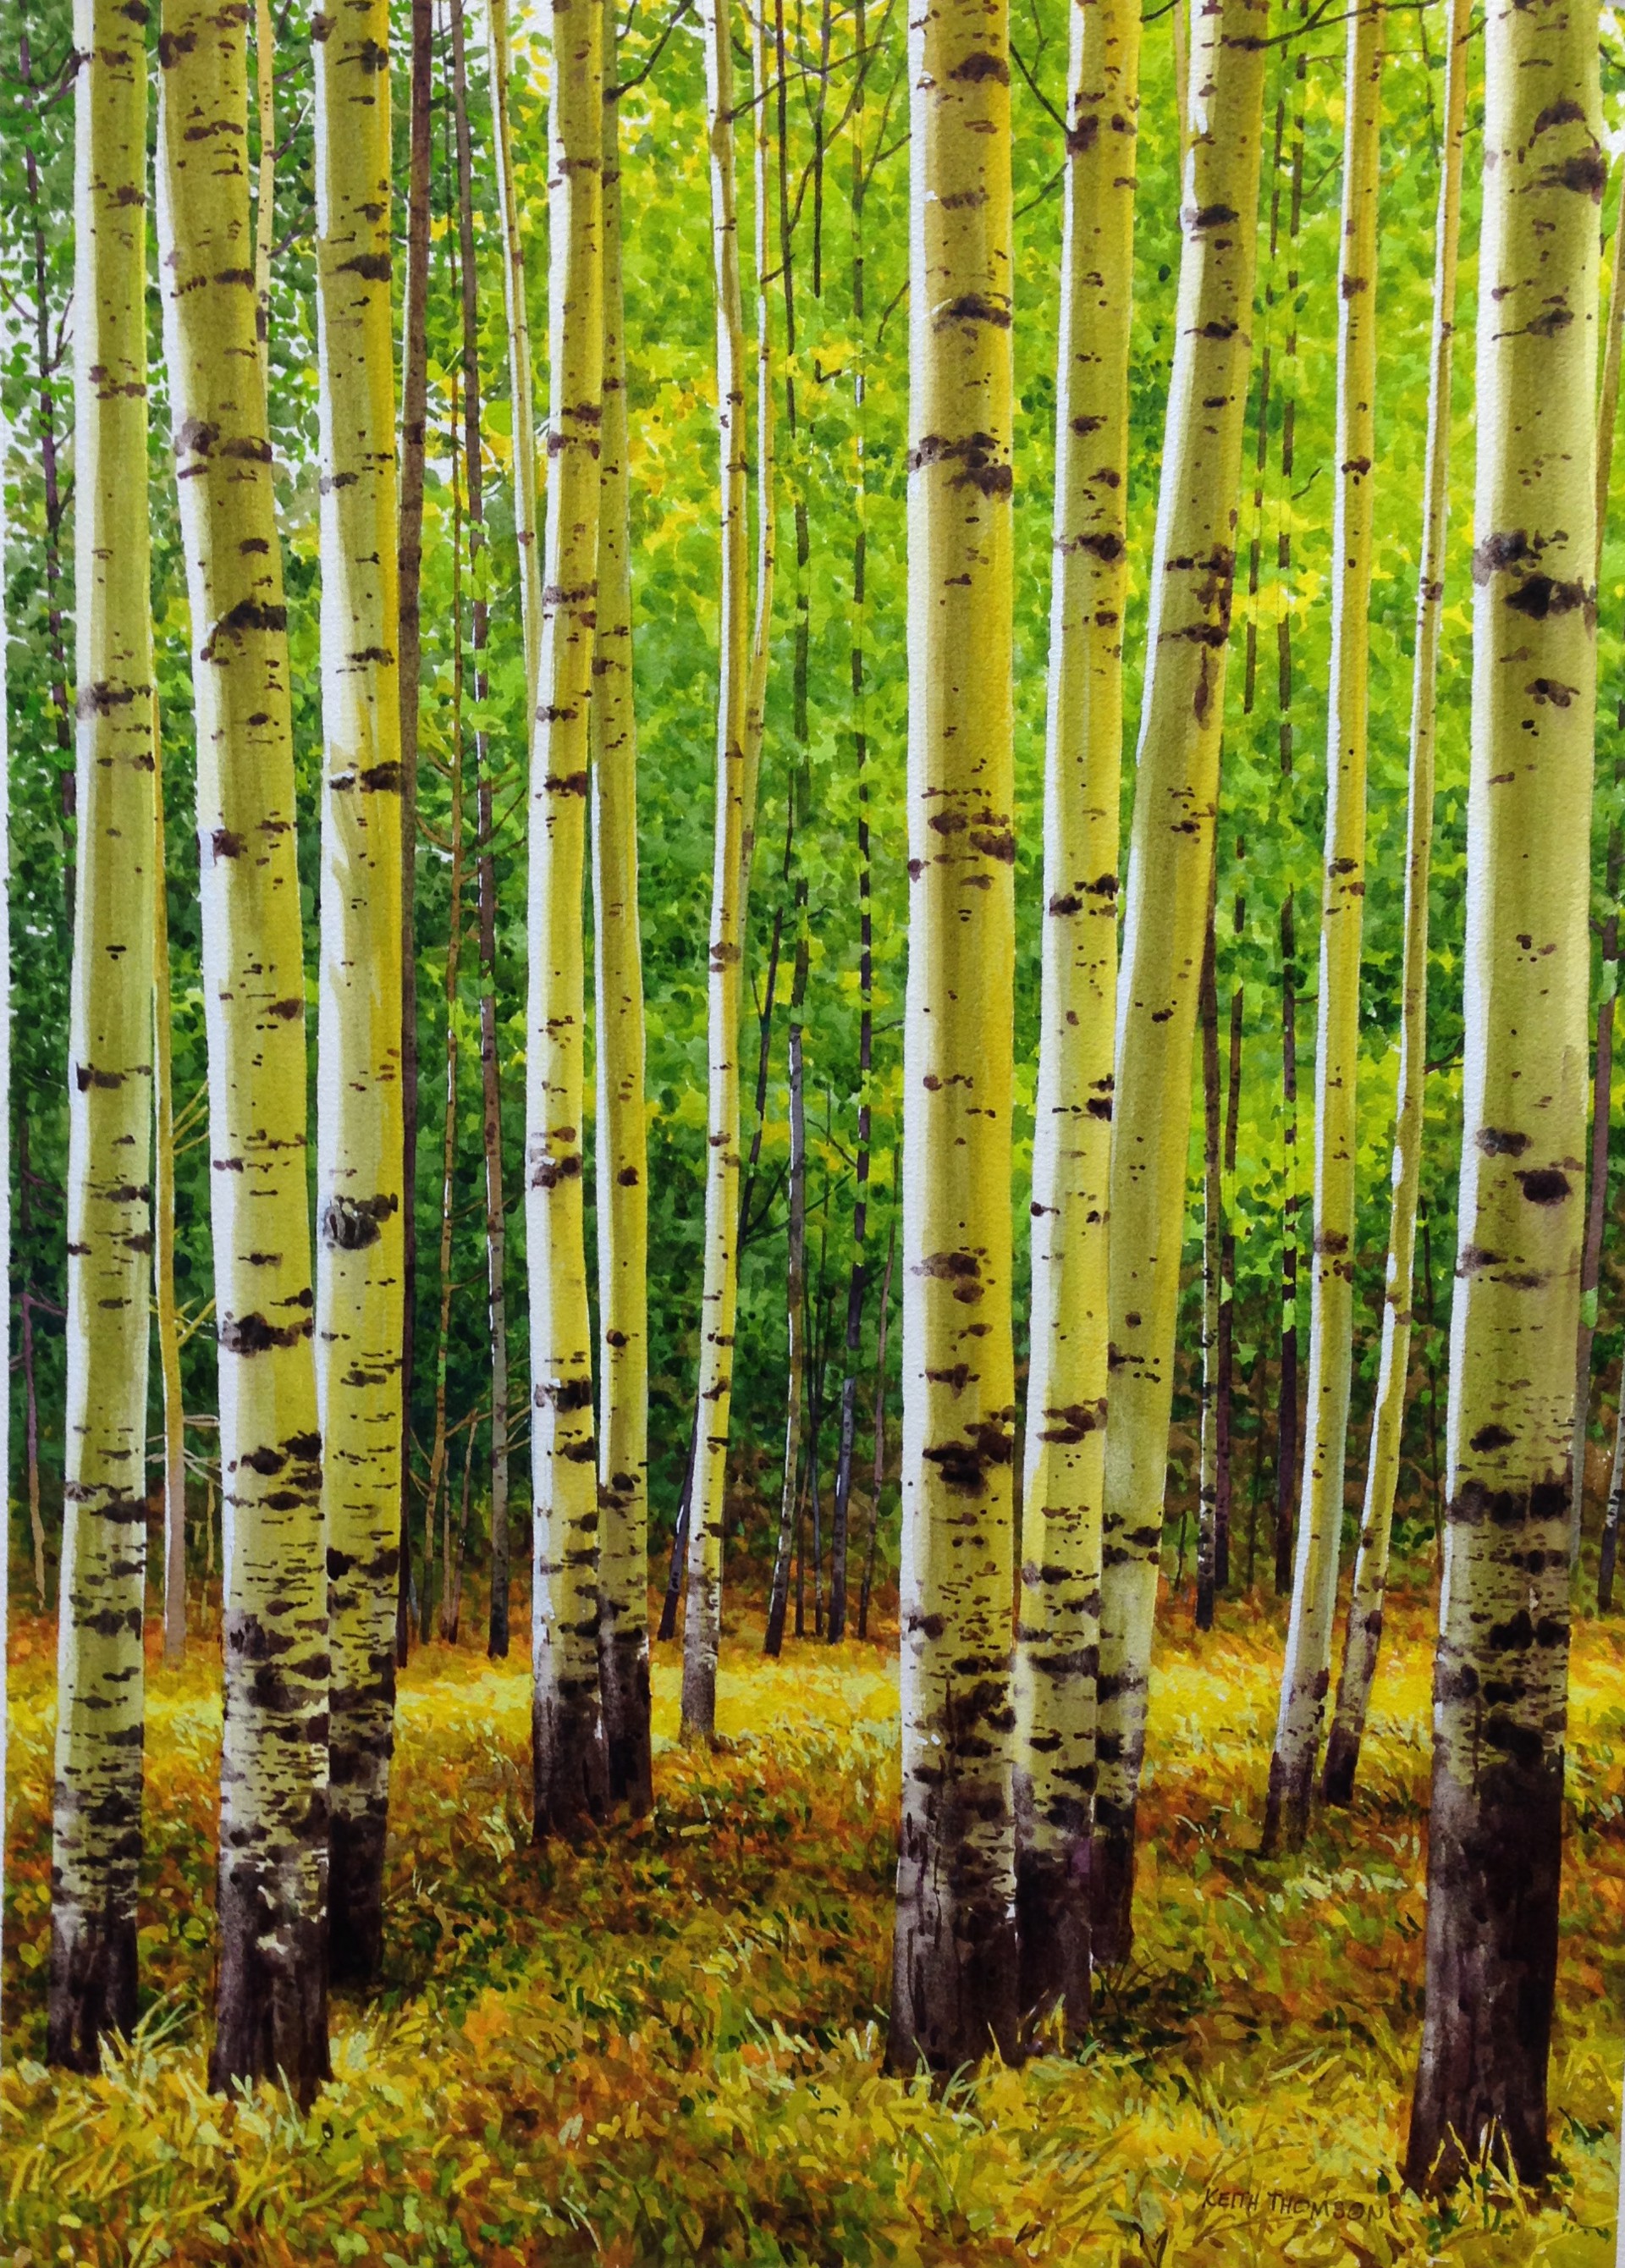 Silver Birch by Keith Thomson